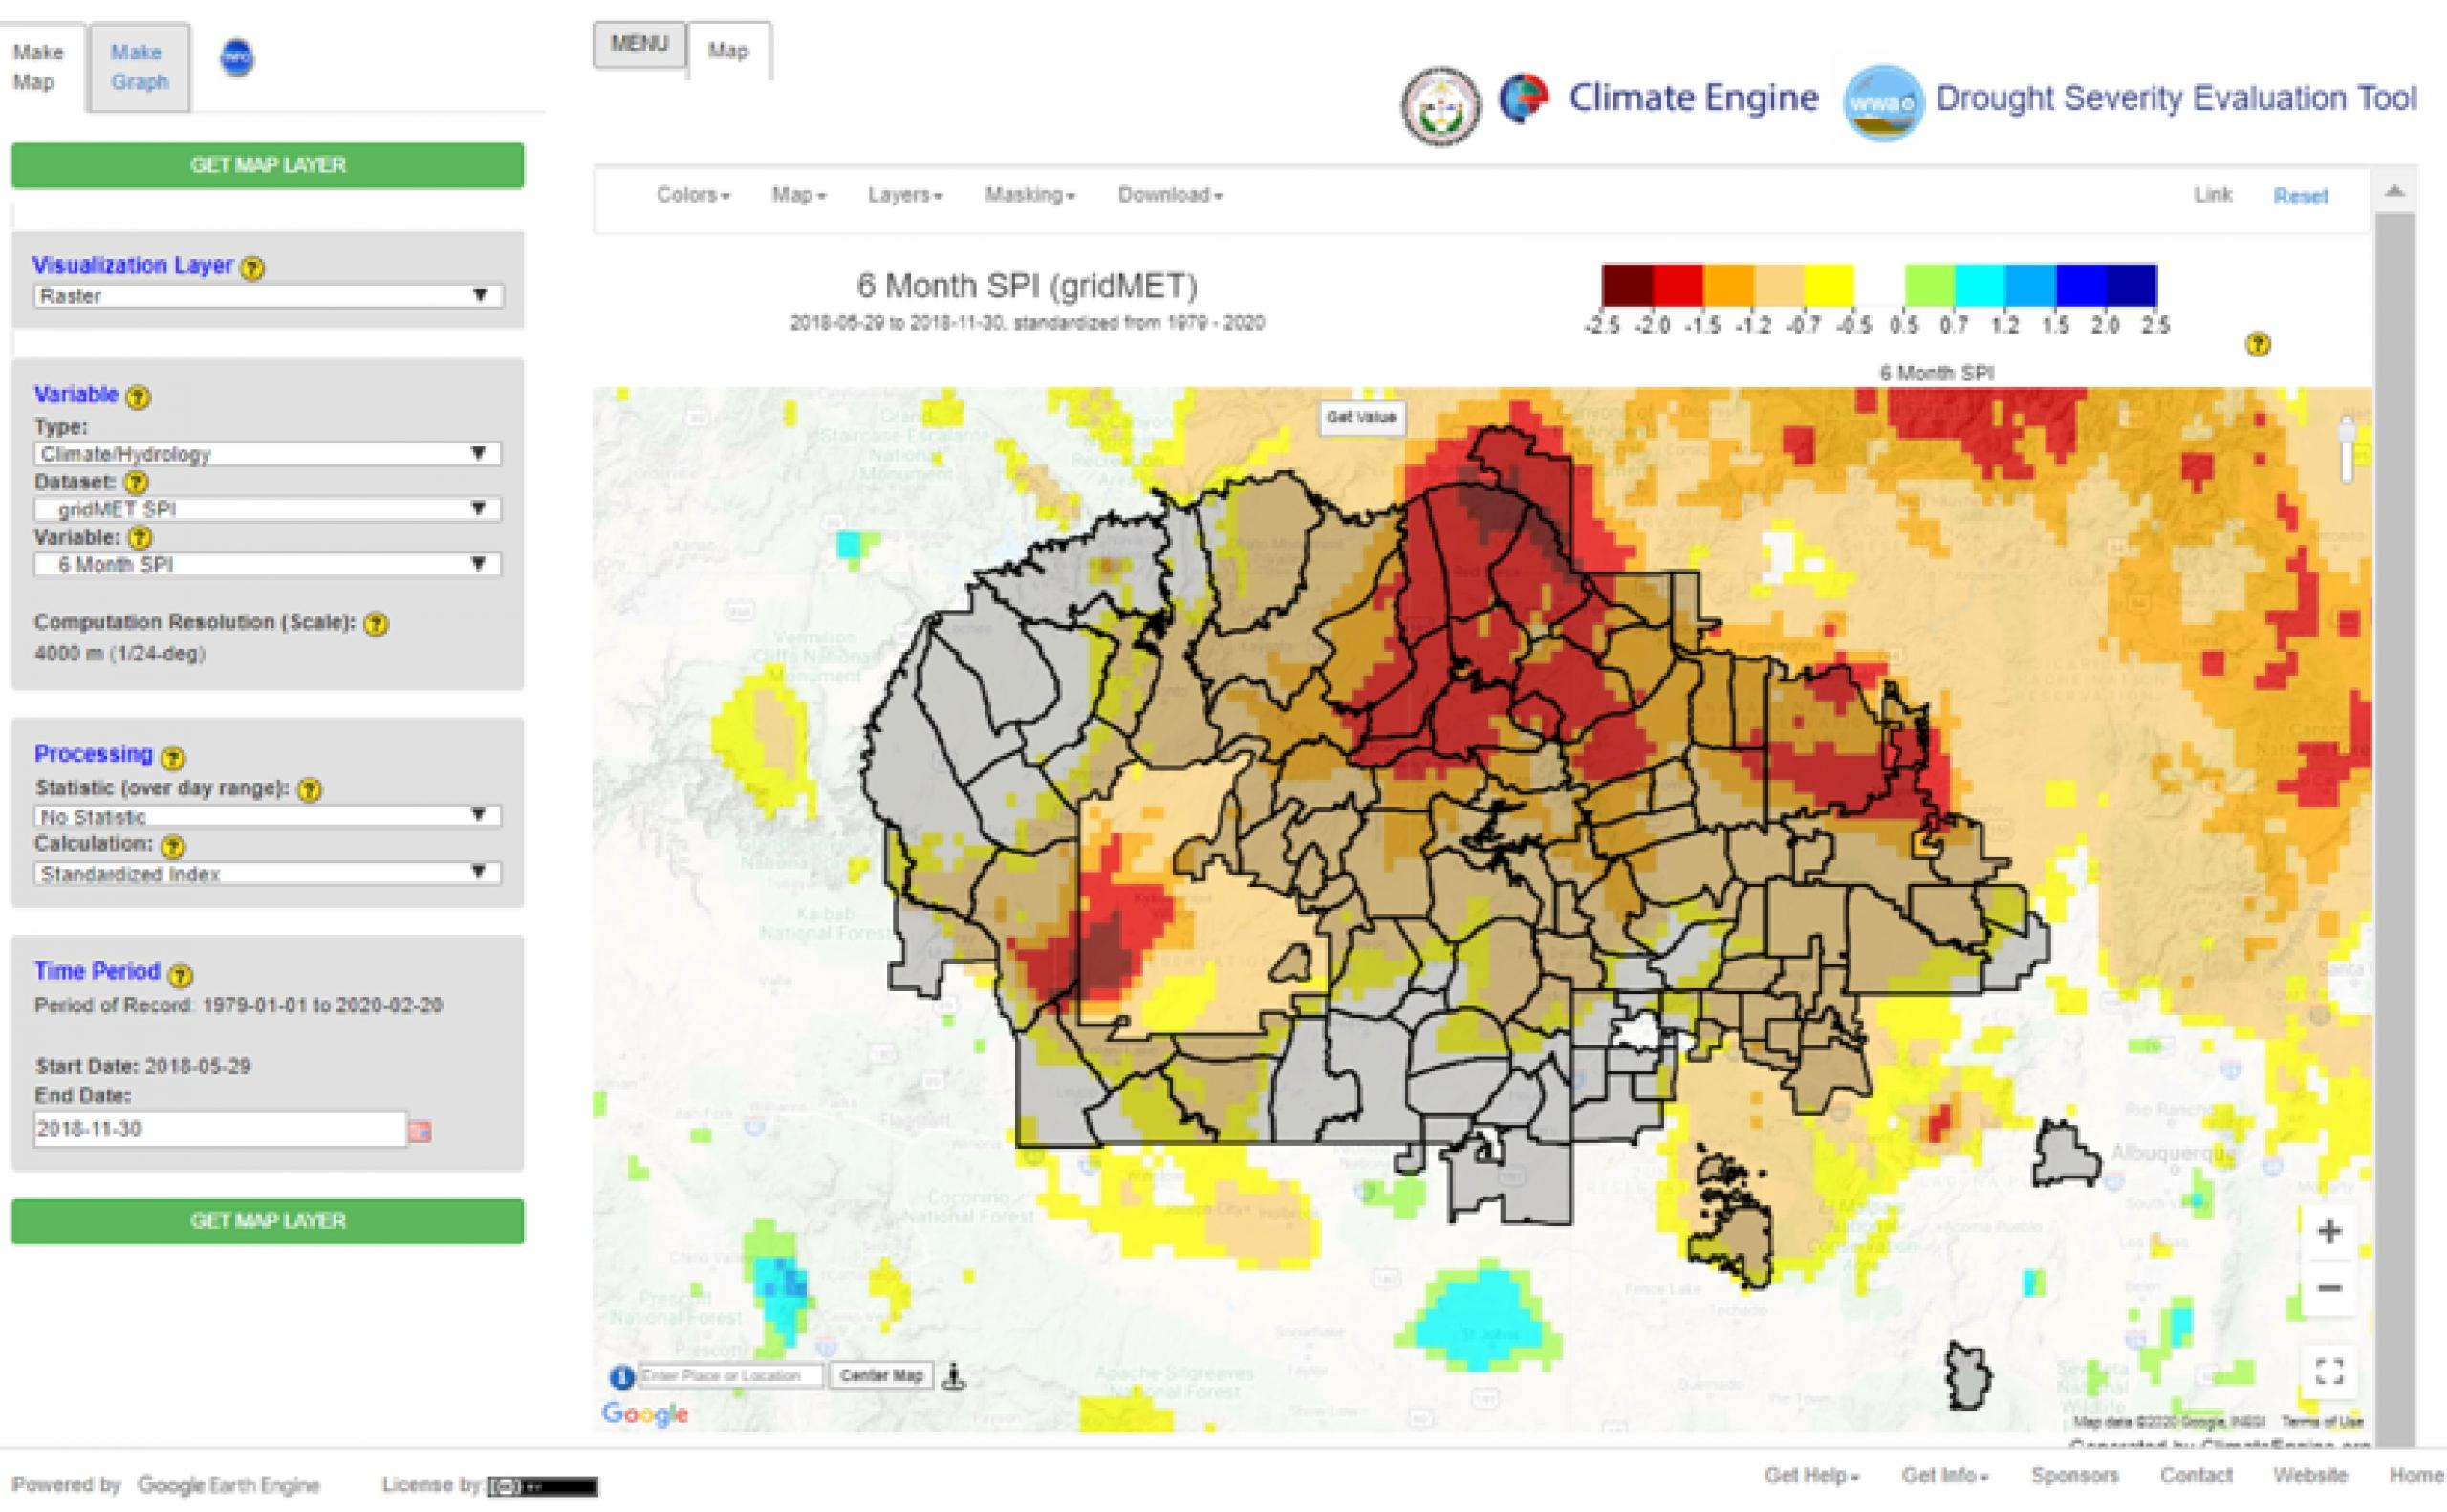 The Drought Severity Evaluation Tool showing the six-month Standardized Precipitation Index displayed as a map across the Navajo Nation